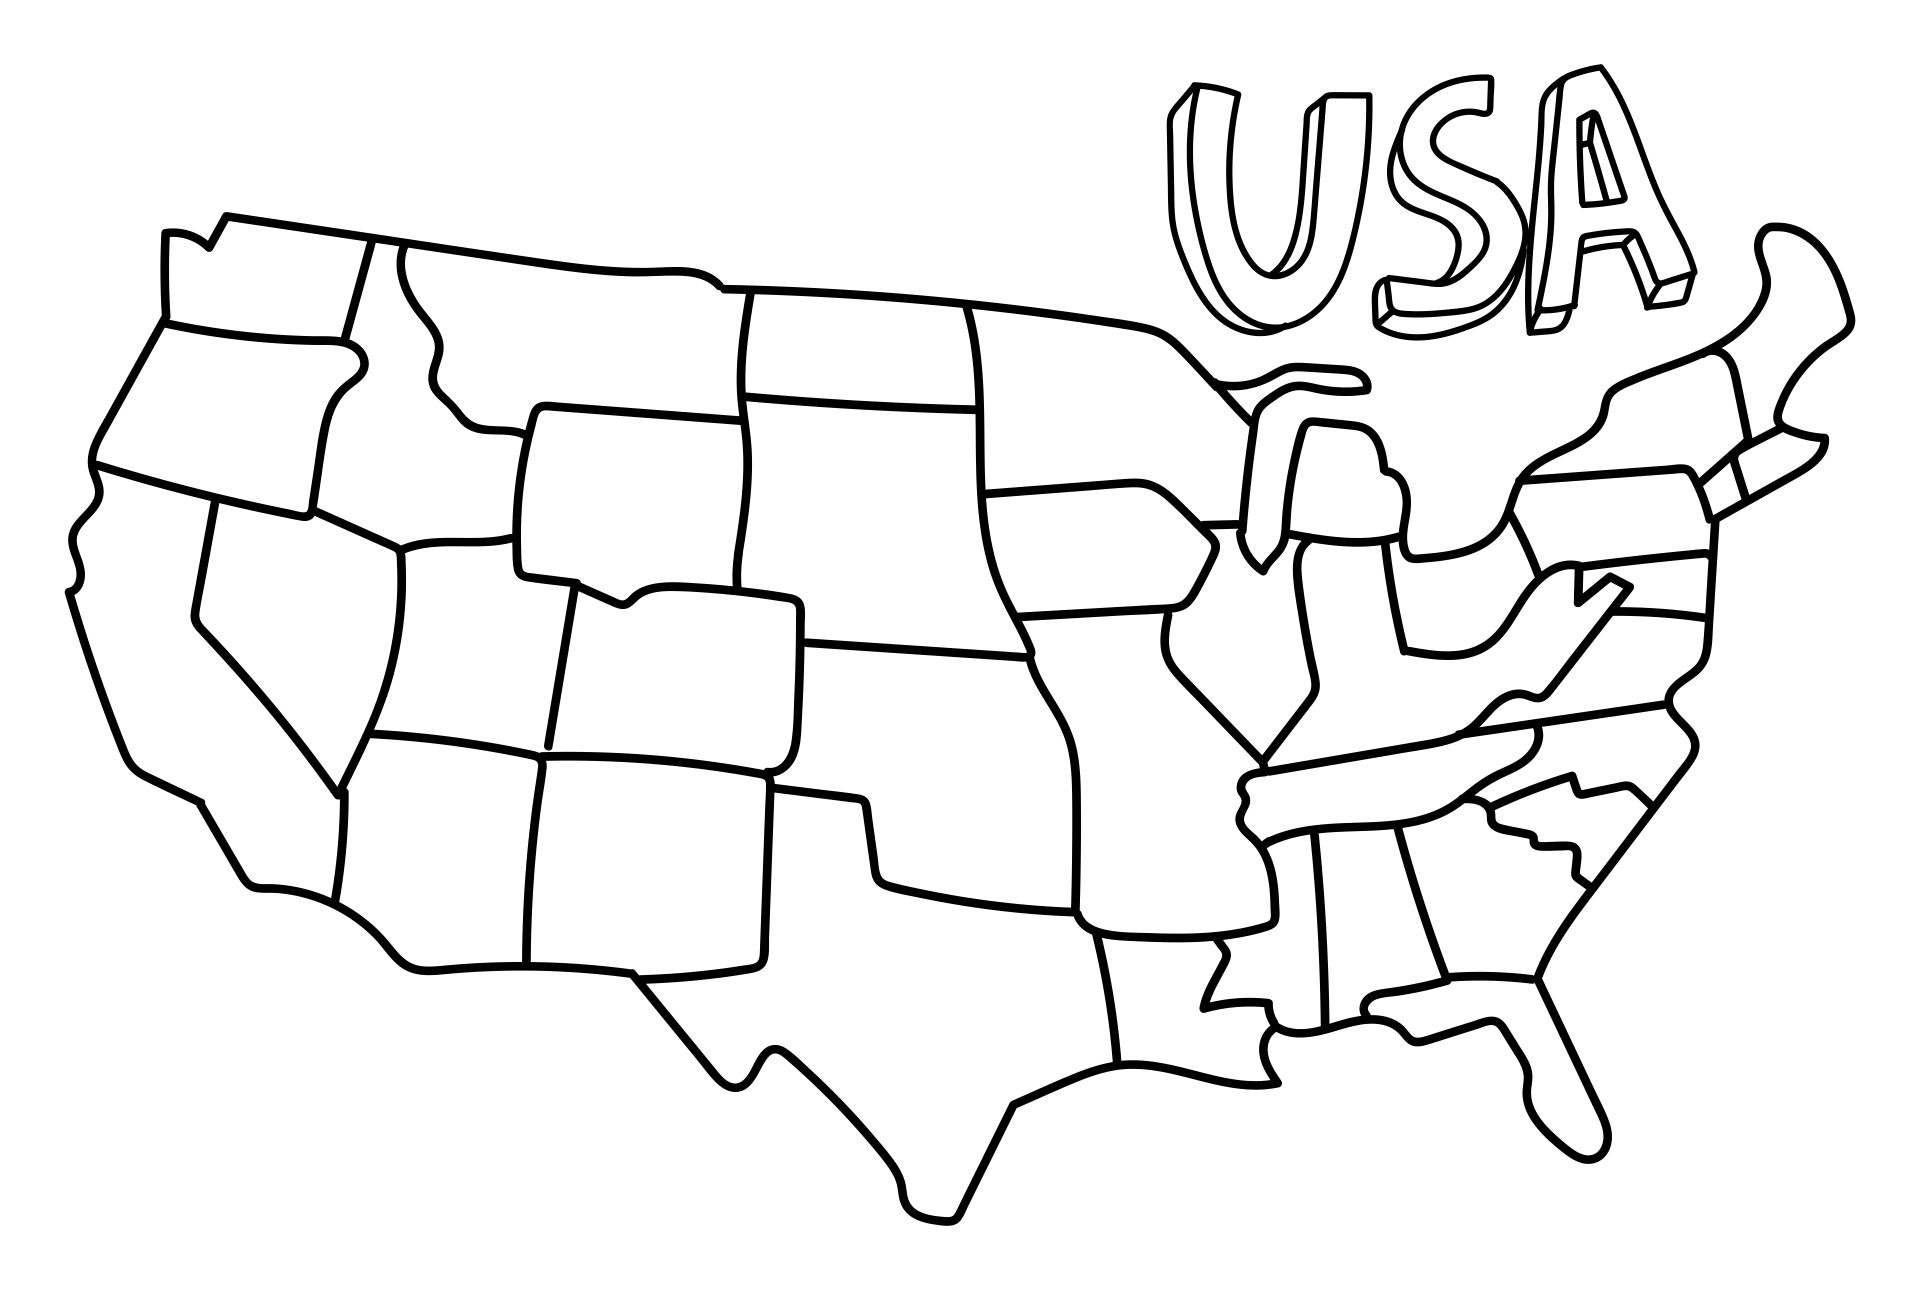 coloring-page-map-of-usa-map-of-world